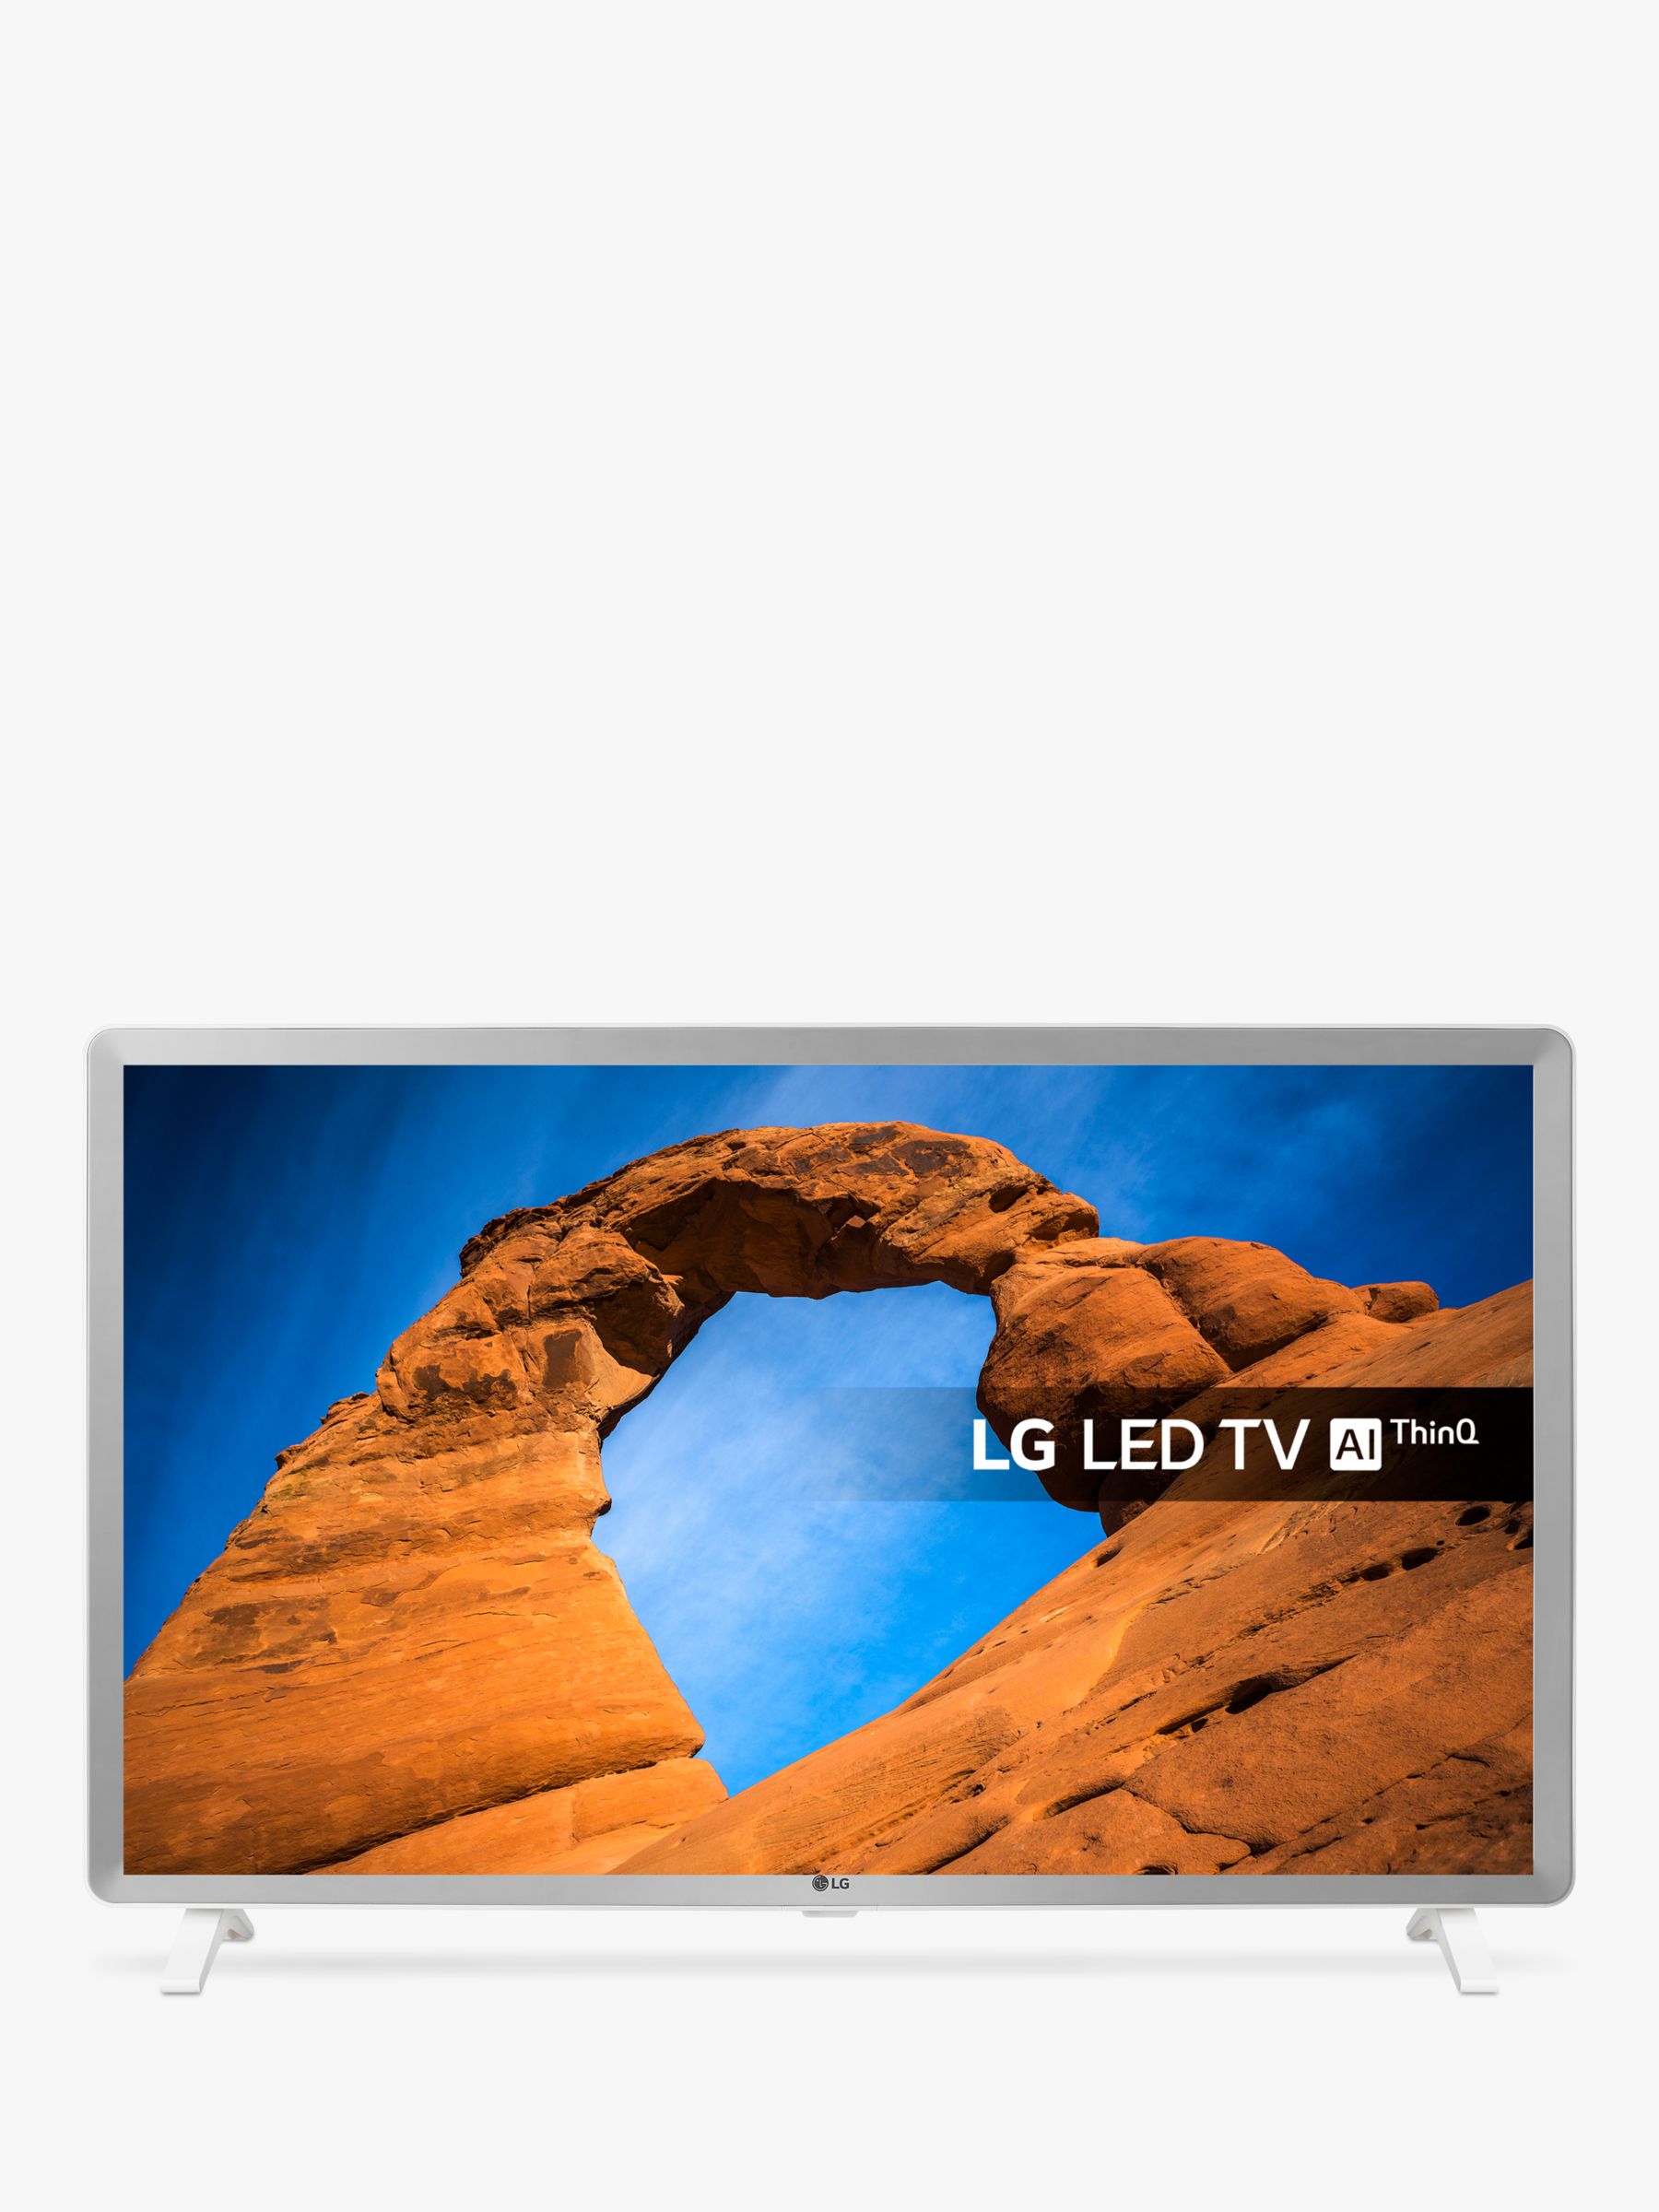 LG 32LK6200PLA LED HDR Full HD 1080p Smart TV, 32 with Freeview Play/Freesat HD, White & Grey